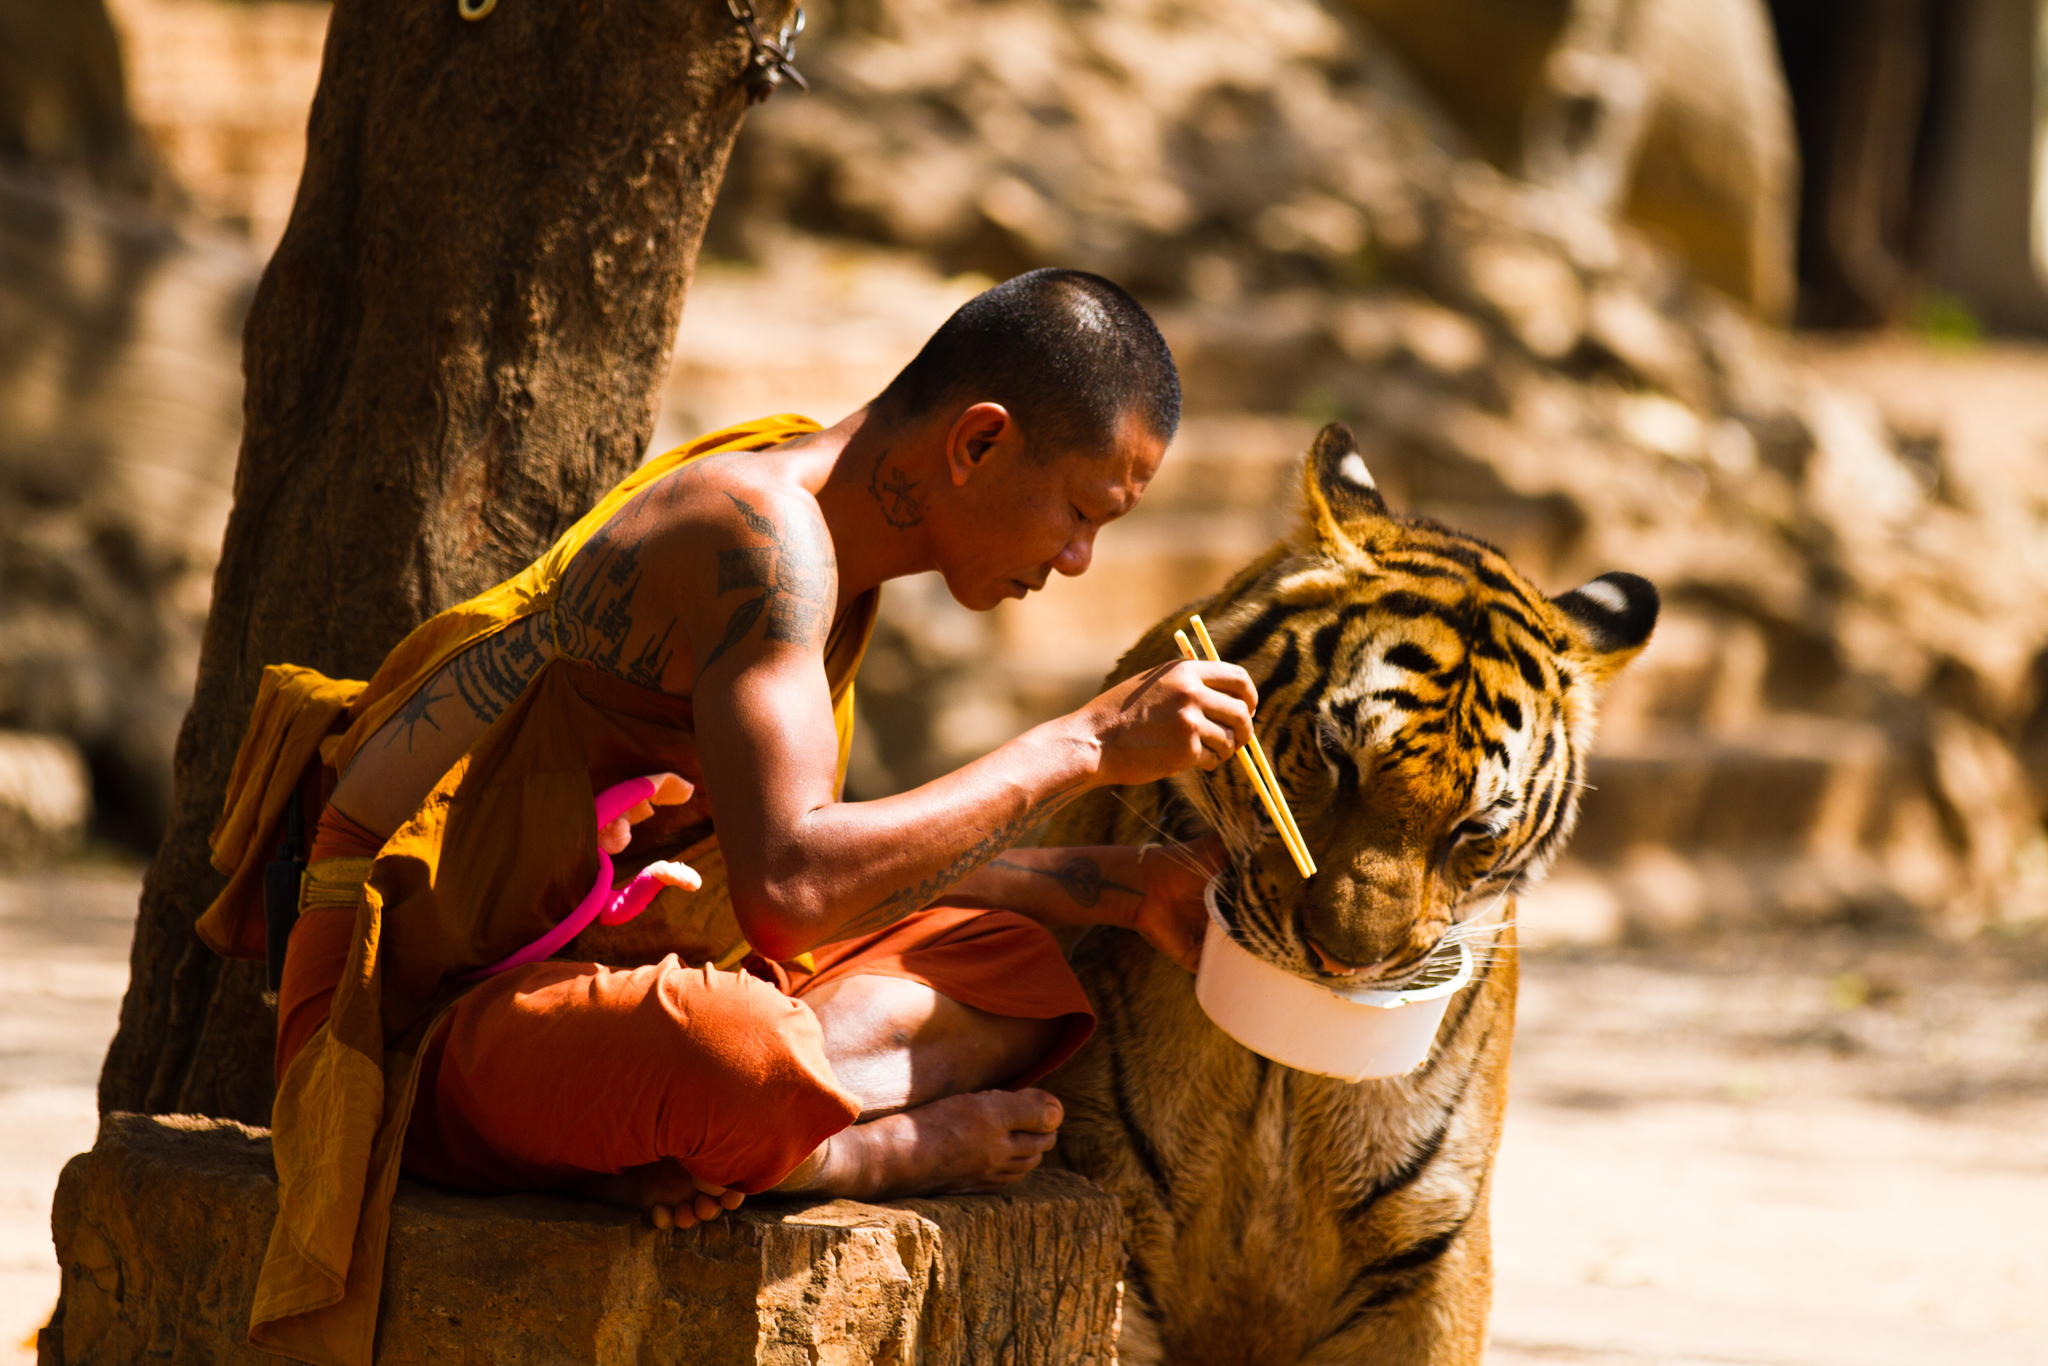 A Buddhist monk shares his meal with a tiger at the Kanchanaburi Tiger Temple in Thailand.